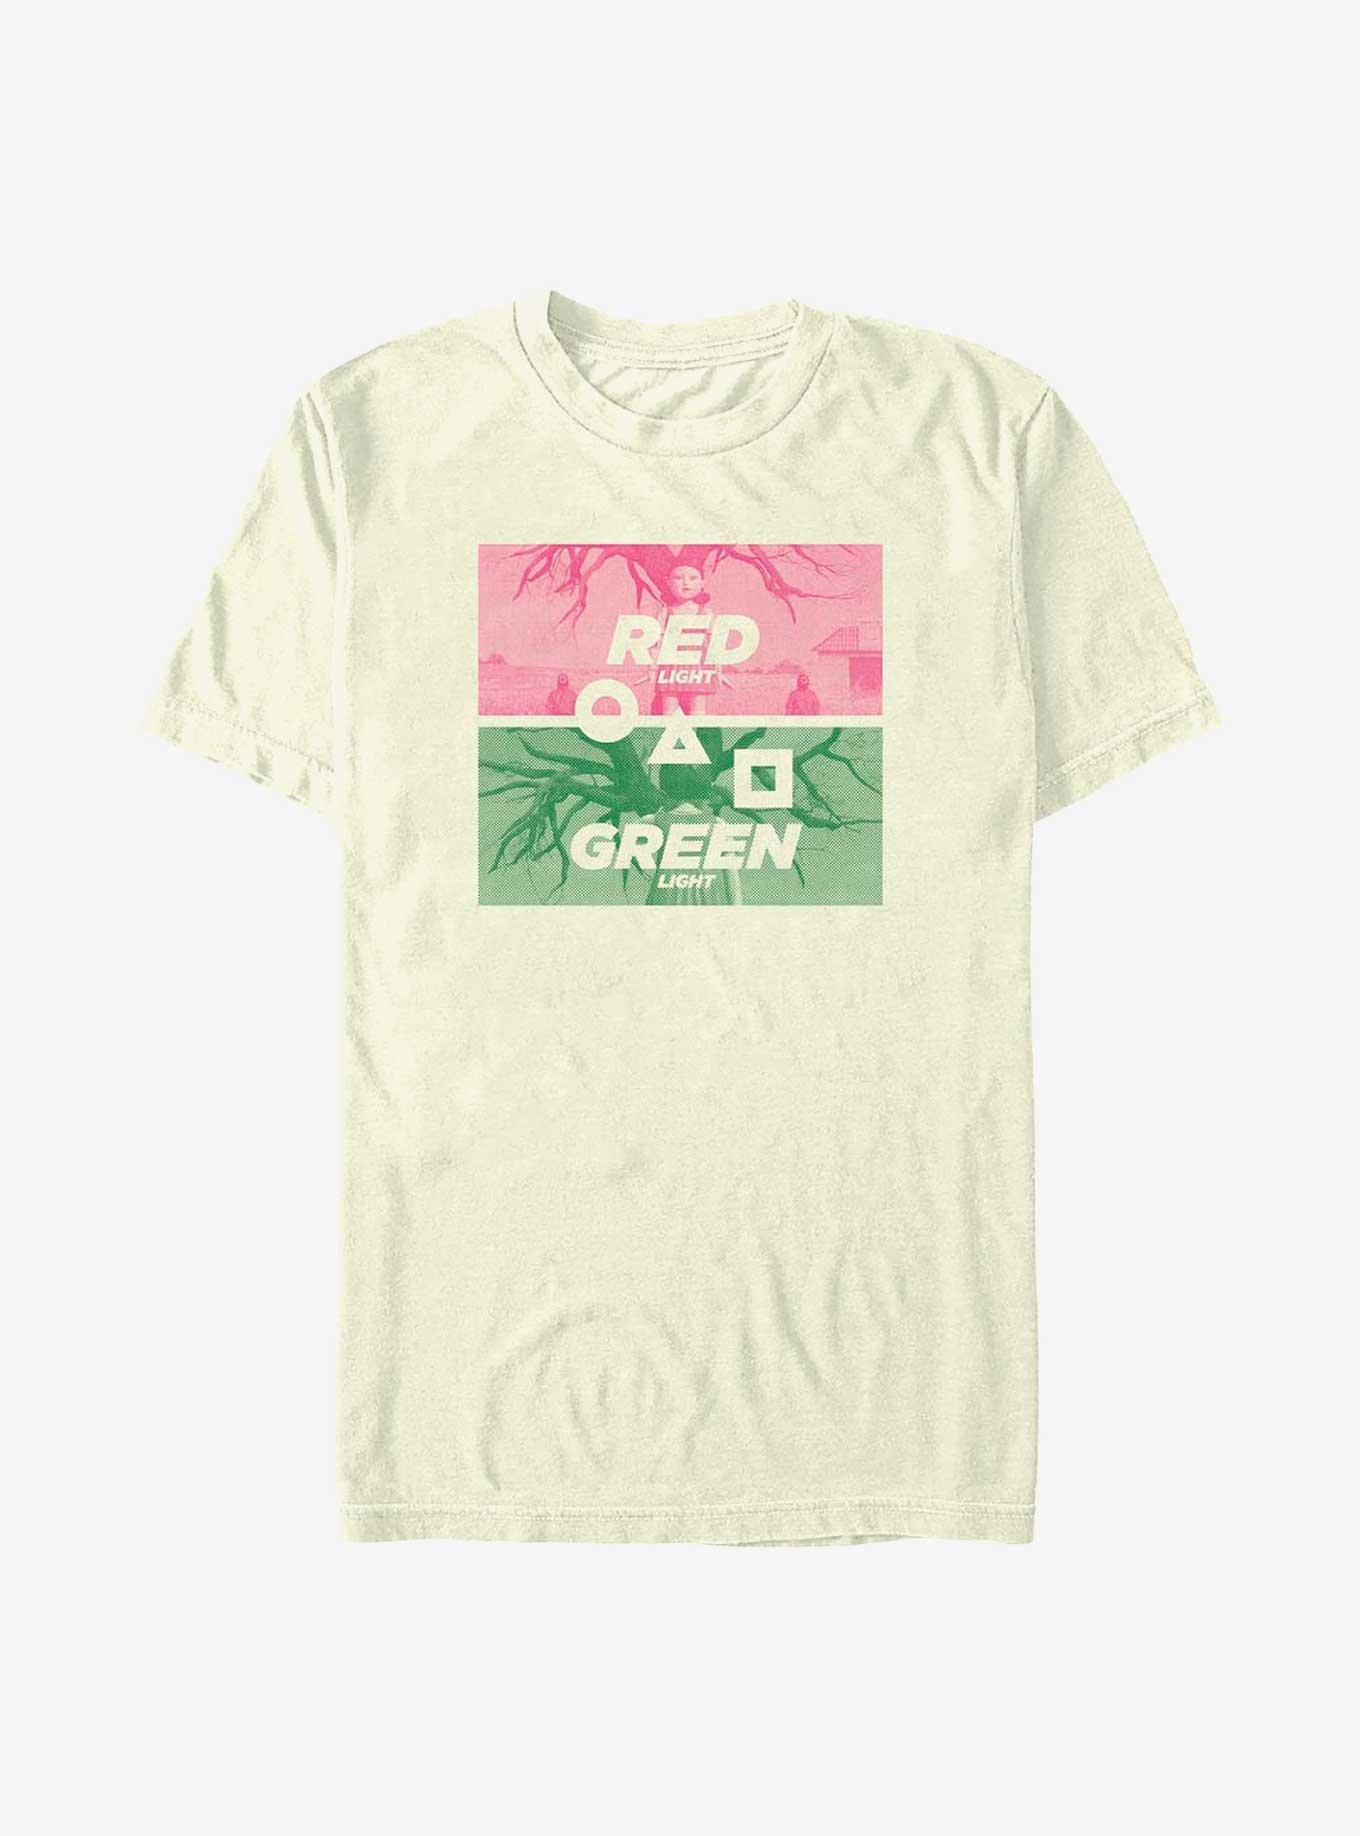 Squid Game First Red Light Green T-Shirt